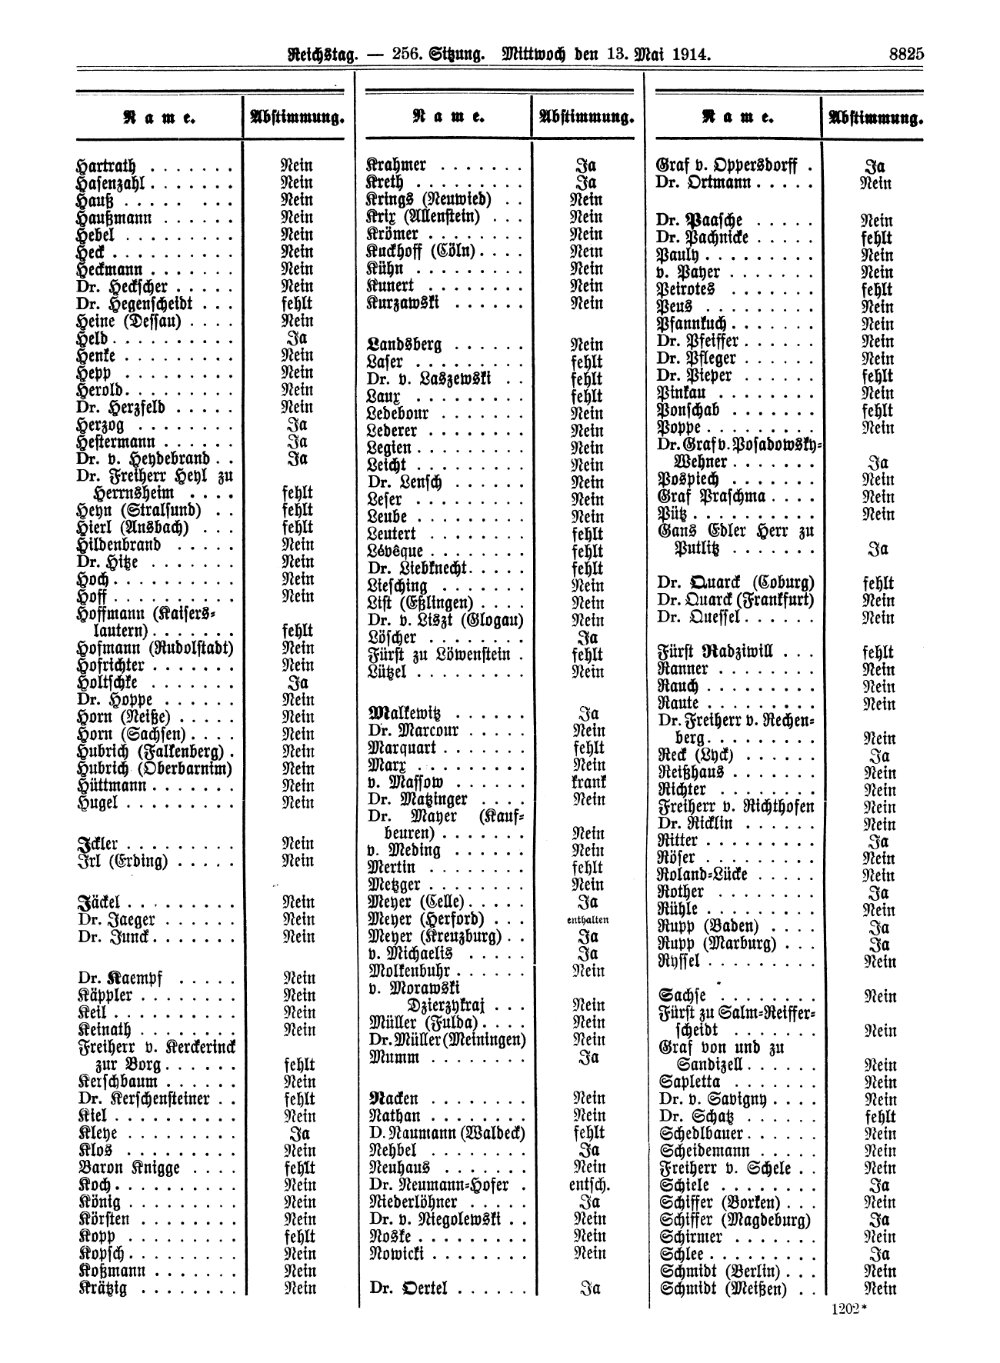 Scan of page 8825